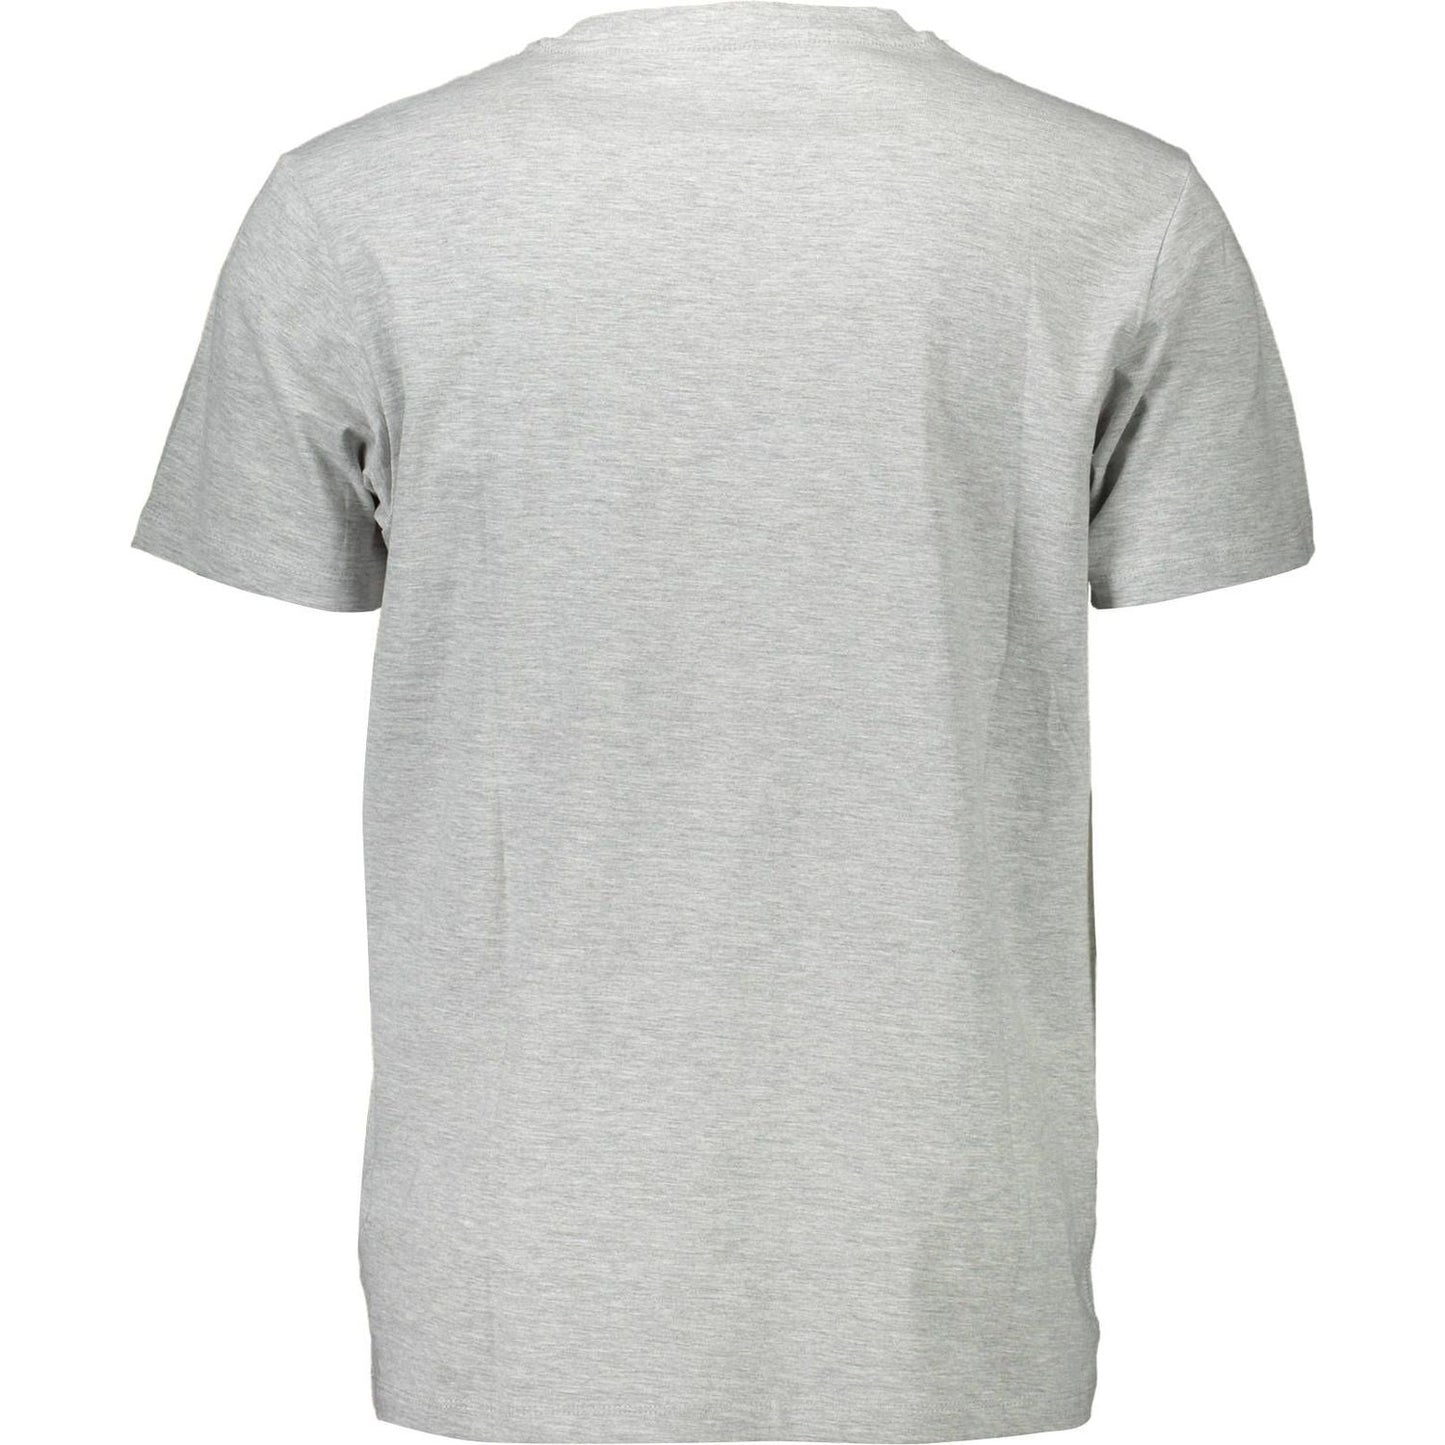 Guess Jeans Classic Gray Crew Neck Logo Tee classic-gray-crew-neck-logo-tee